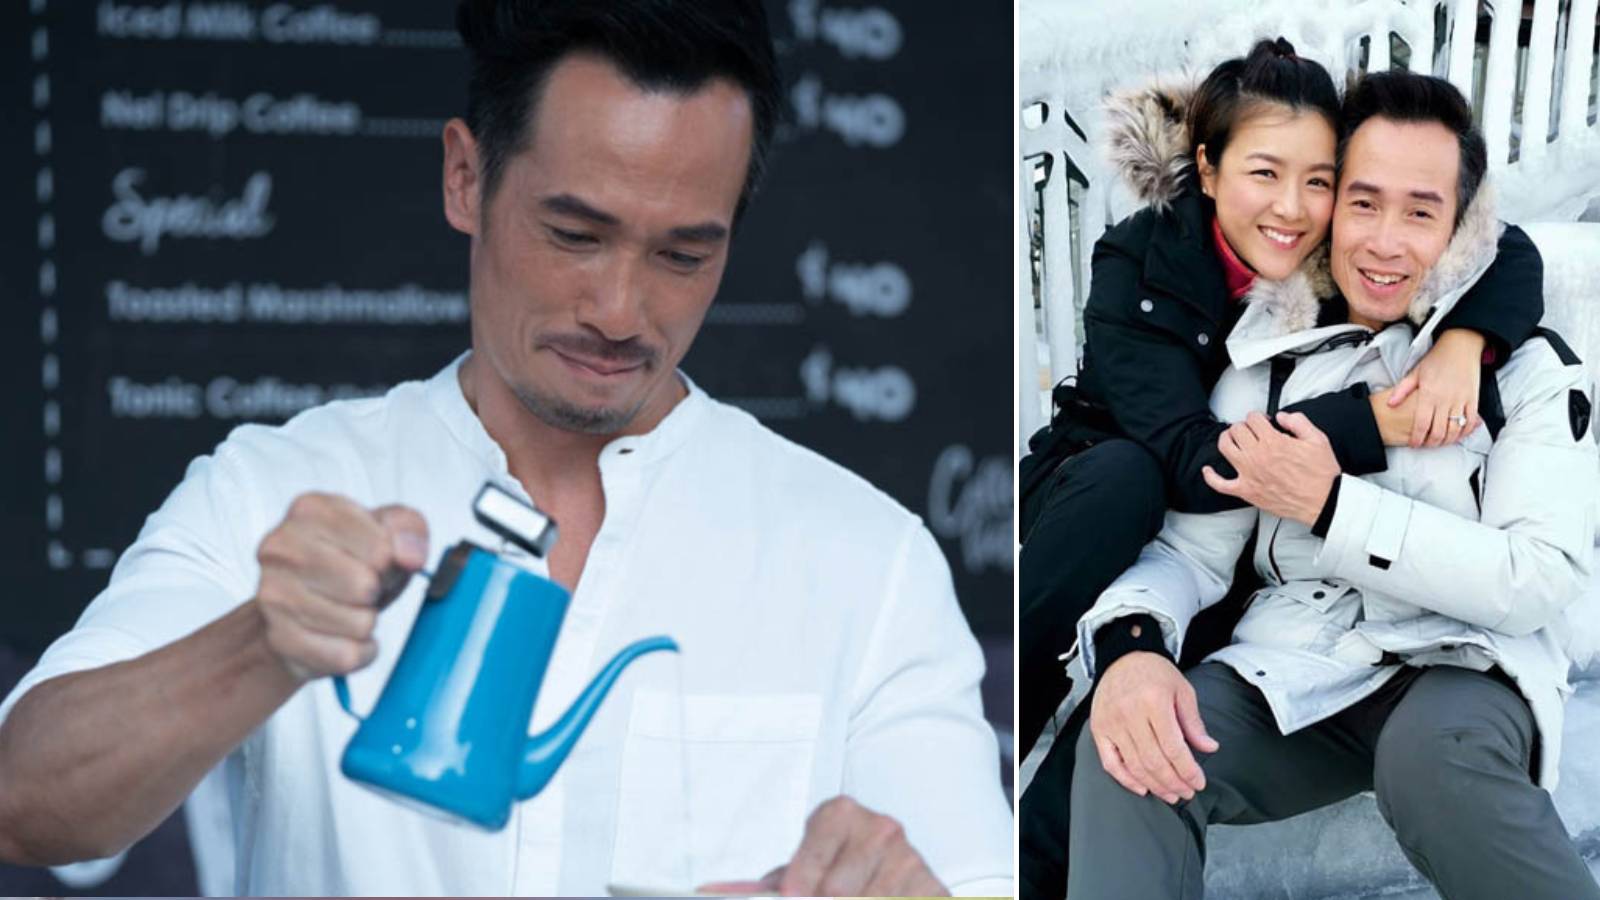 Moses Chan Calls His Wife Aimee Chan His “Queen”, Says He’s Making A Special Coffee Blend For Her